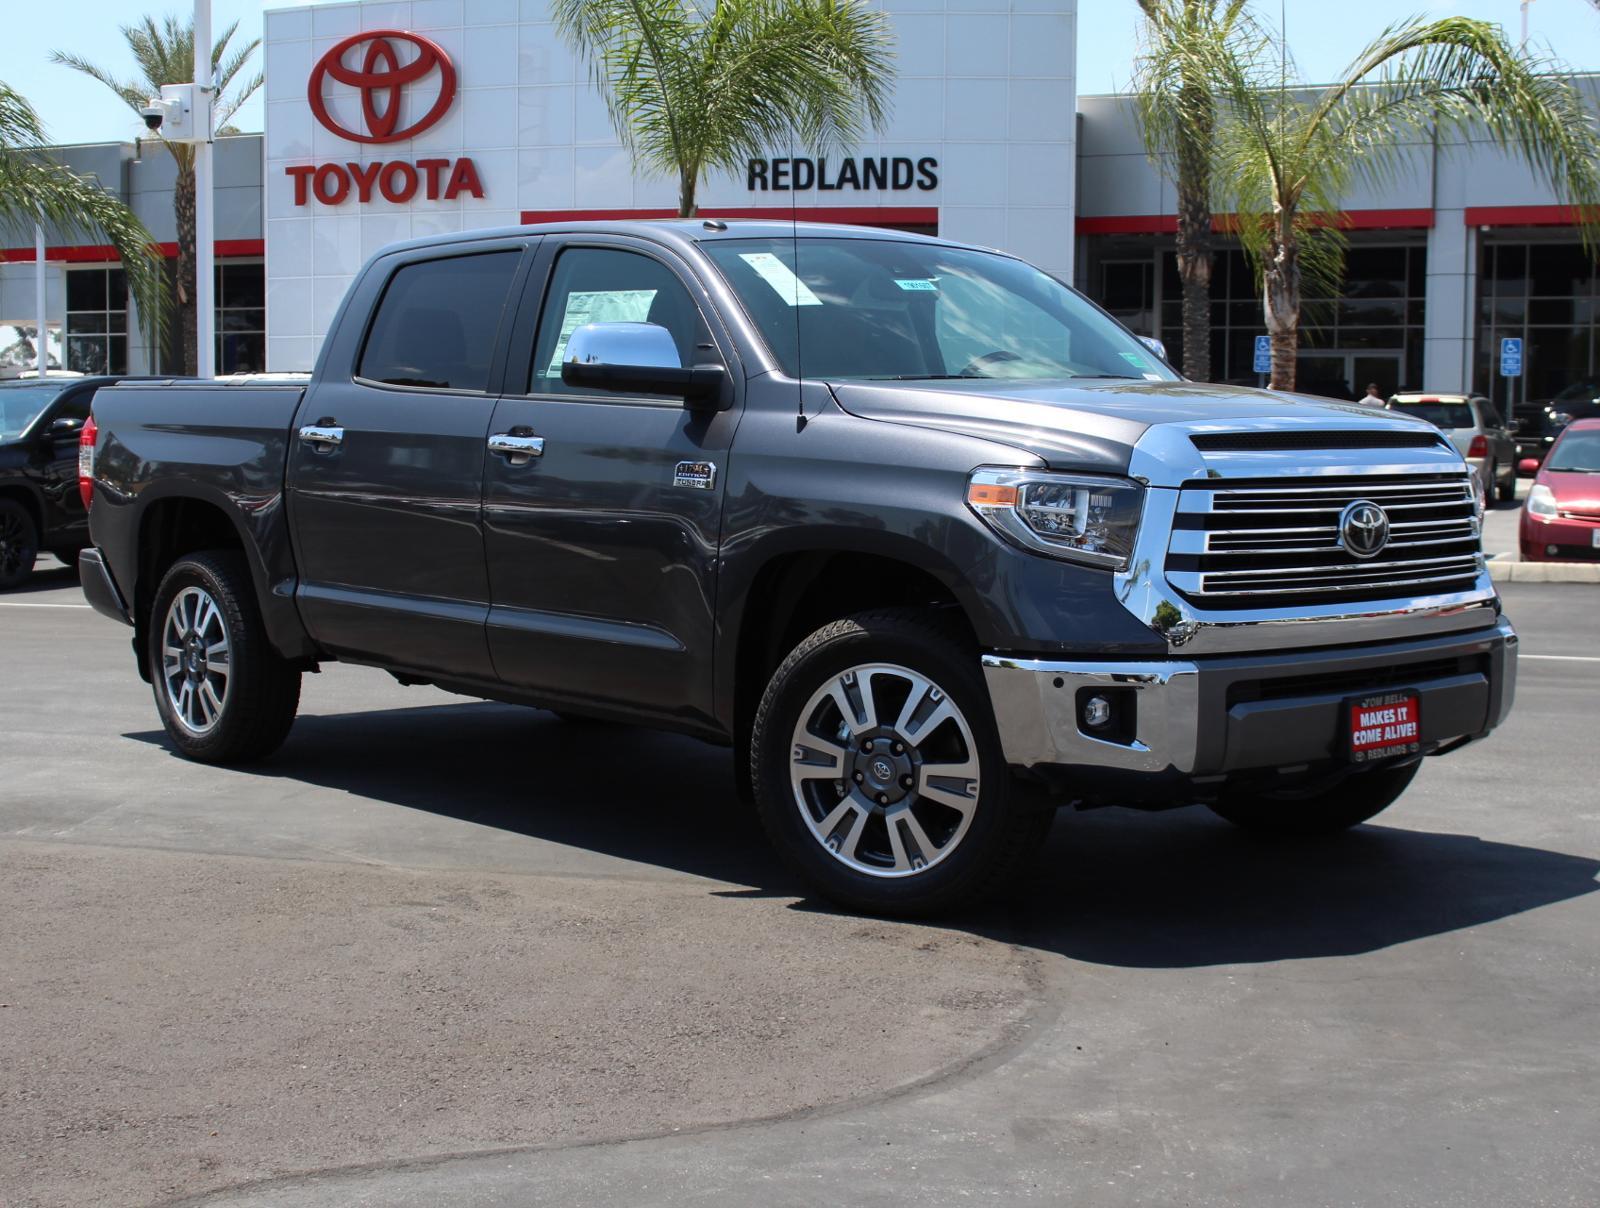 New 2019 Toyota Tundra 4wd 1794 Edition Crewmax 5 5 Bed 5 7l Natl